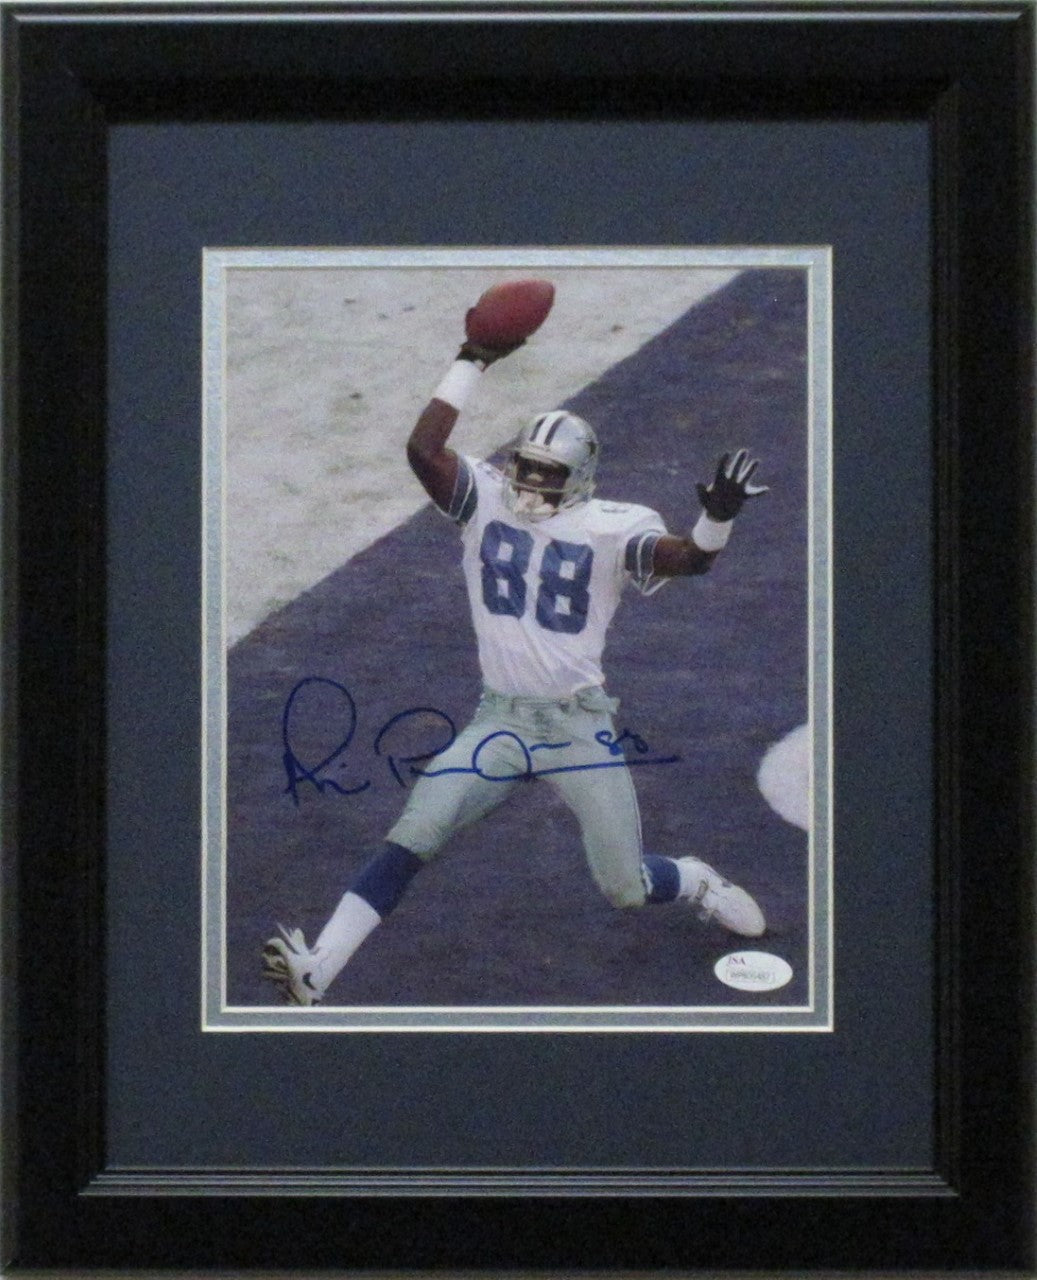 Michael Irvin Dallas Cowboys Autographed 8x10 "Spike" Photo Framed